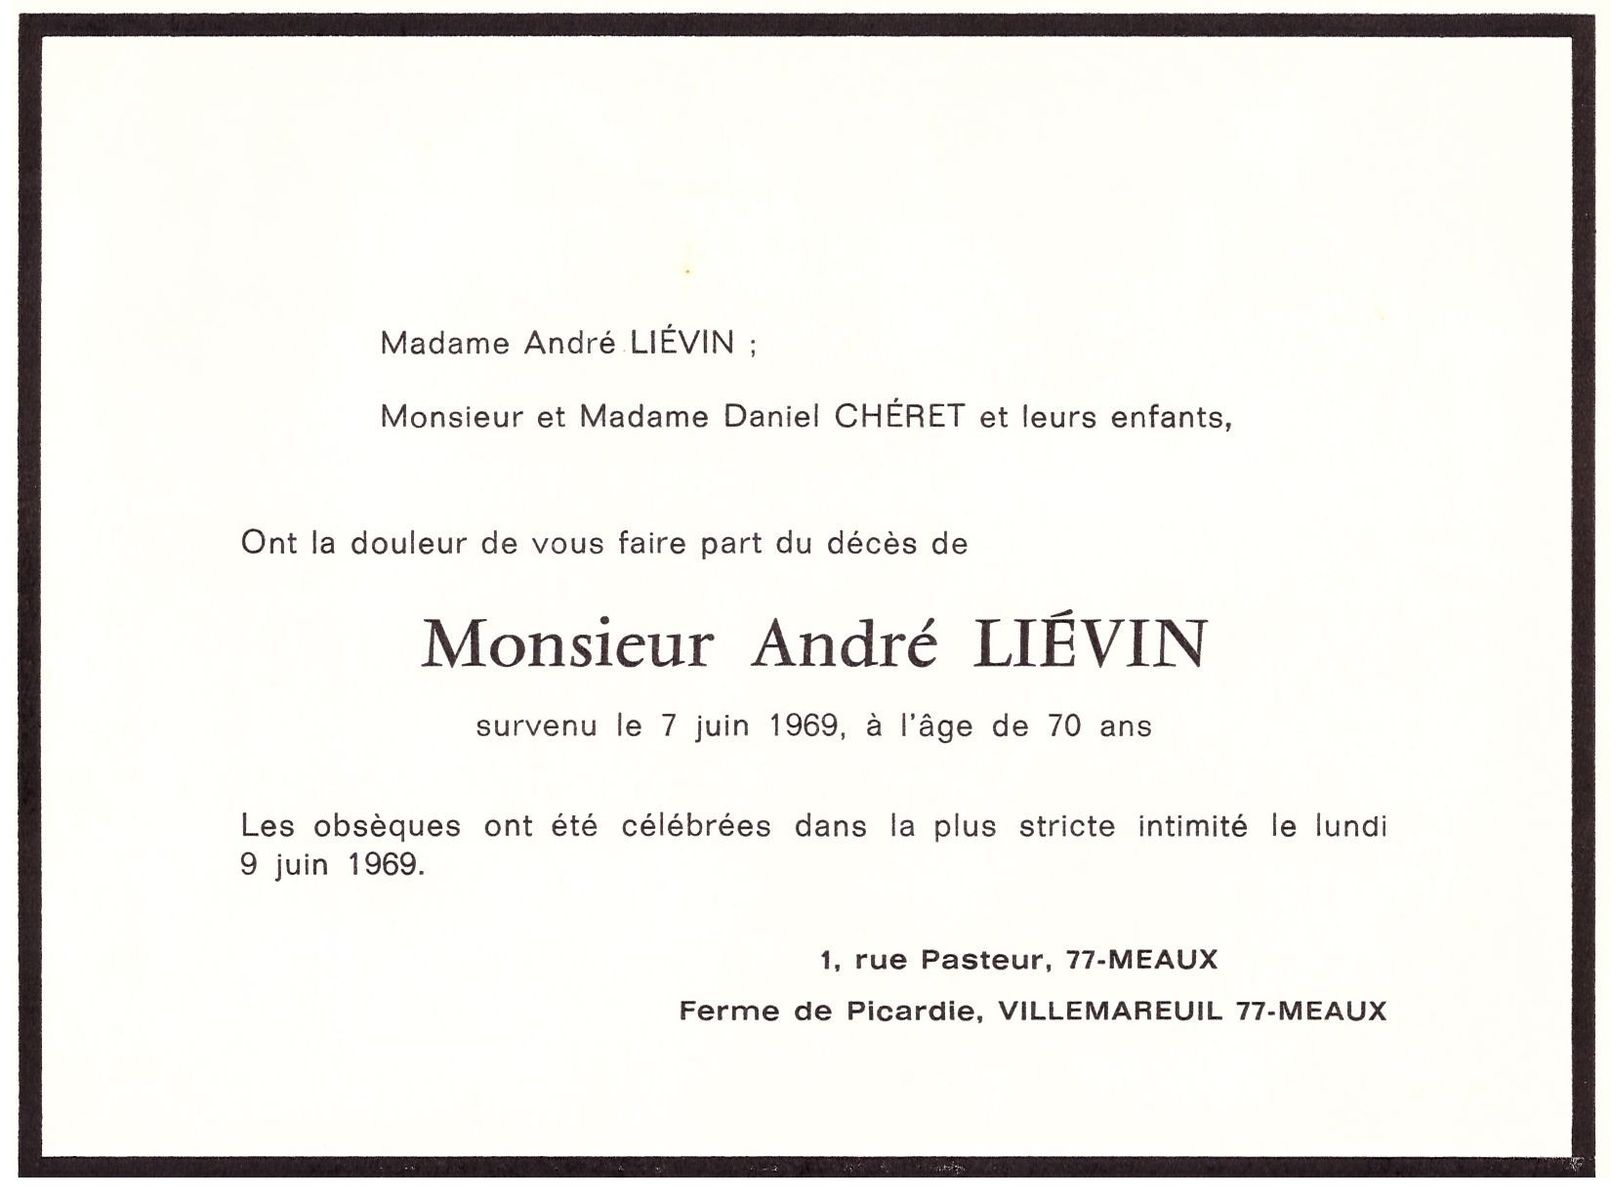 Andre LIEVIN 07/06/1969